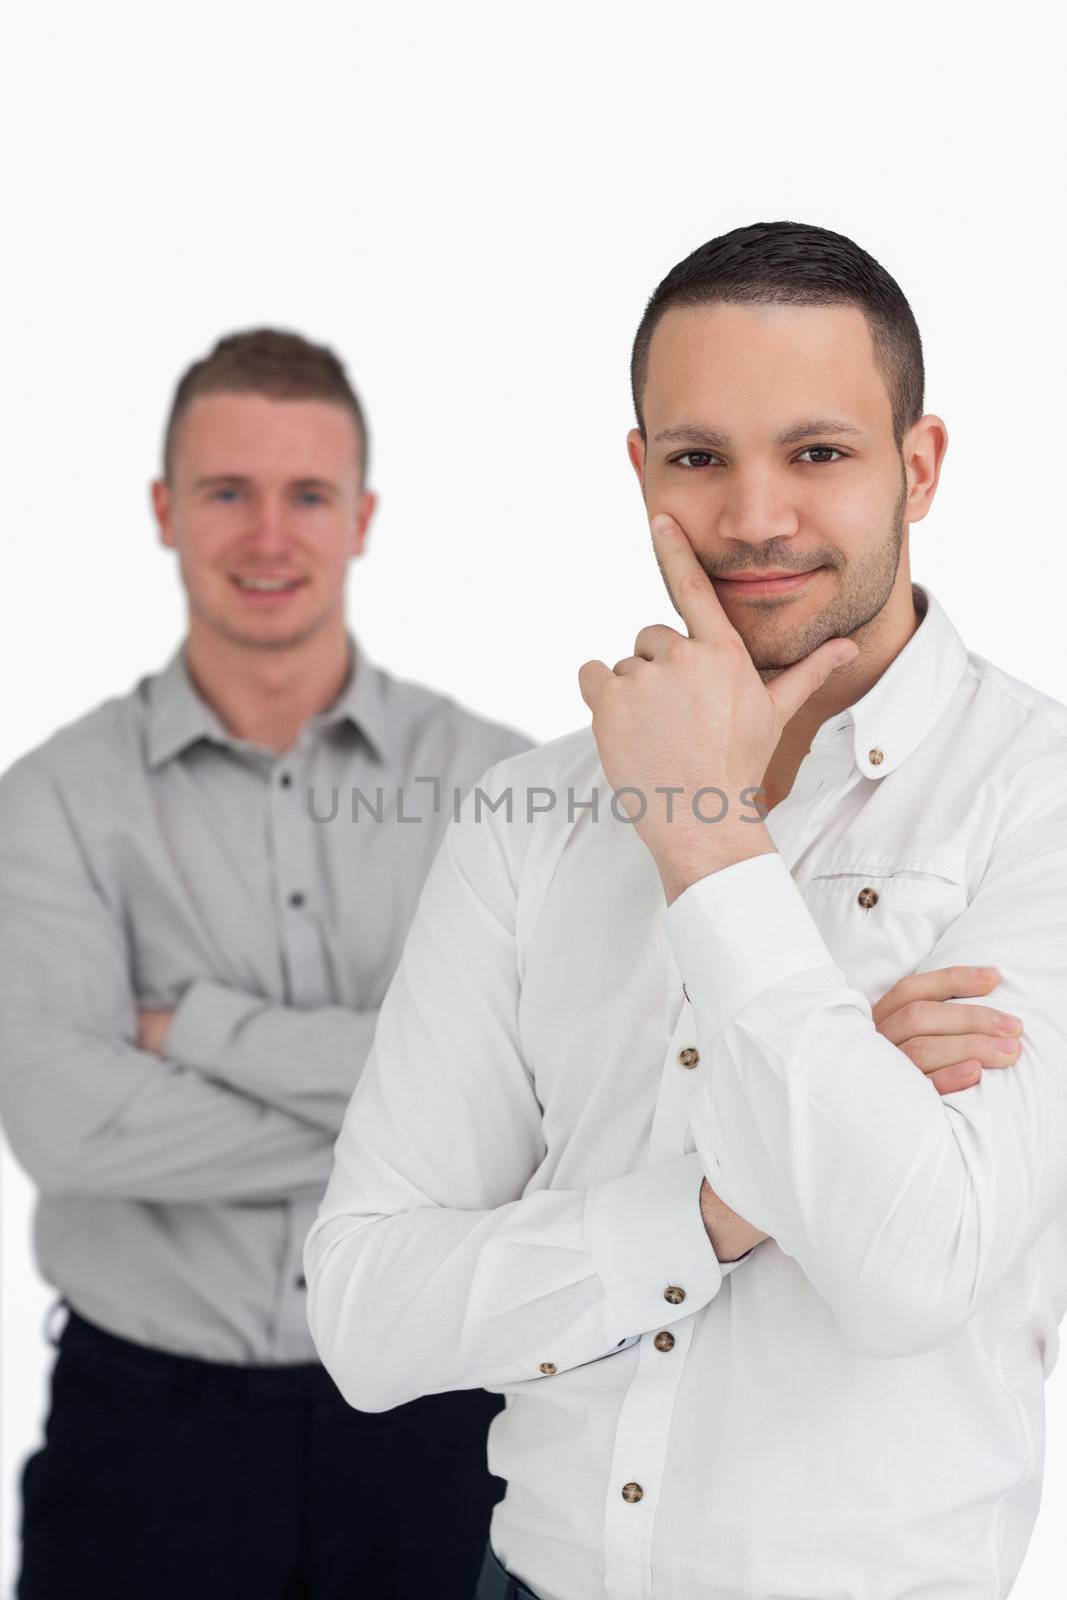 Two men crossing their arms against a white background